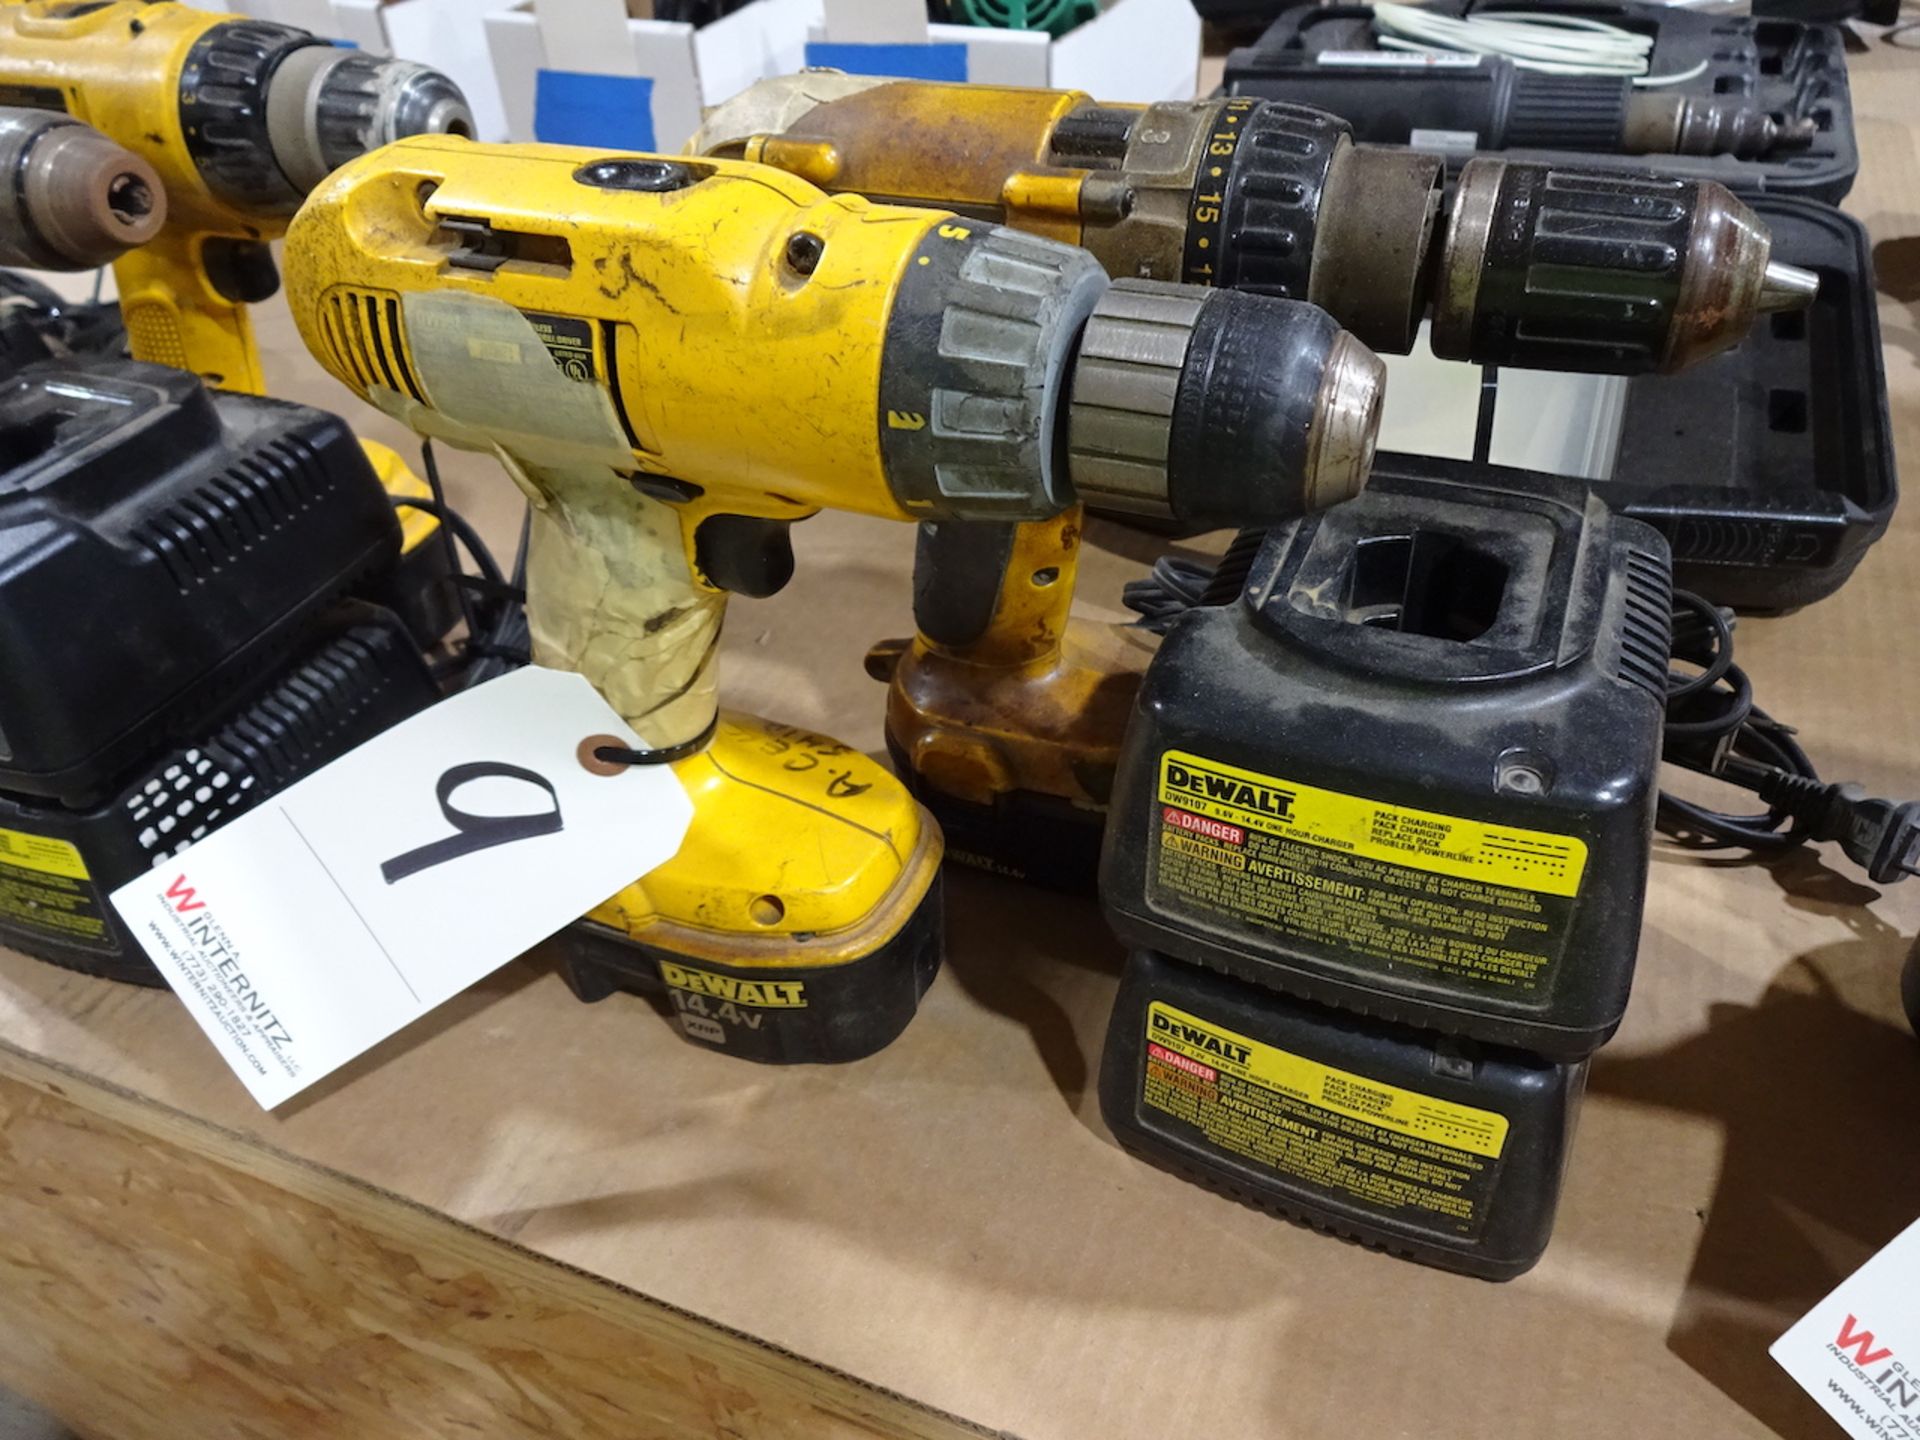 LOT: (2) Dewalt Model DW991 & DW983 Cordless Drill/Drivers, with (2) Batteries & (2) Chargers